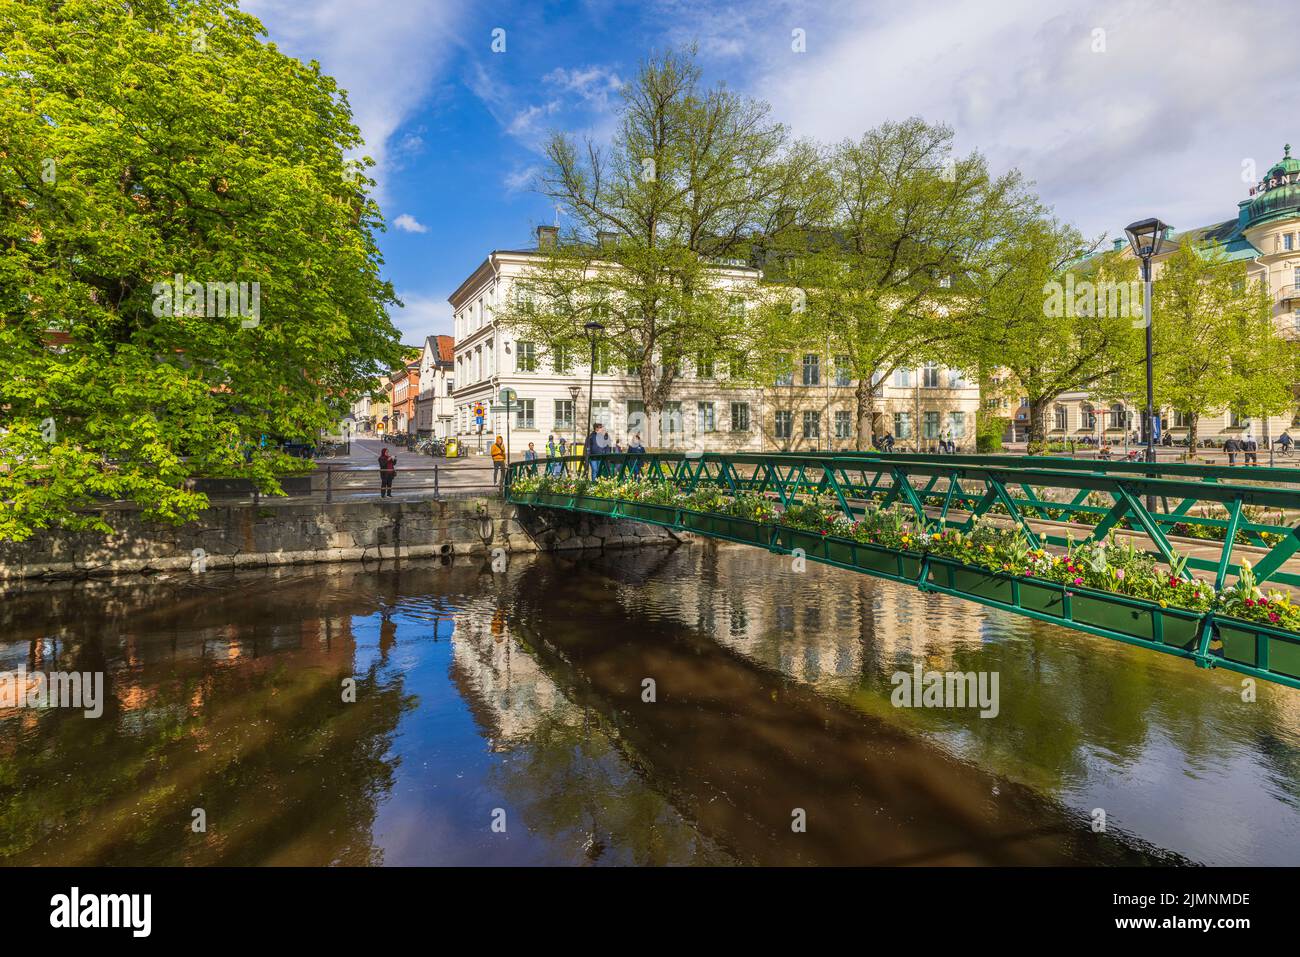 Beautiful calming cityscape view with bridge over small river decorated with flowers. Sweden. Uppsala. Stock Photo